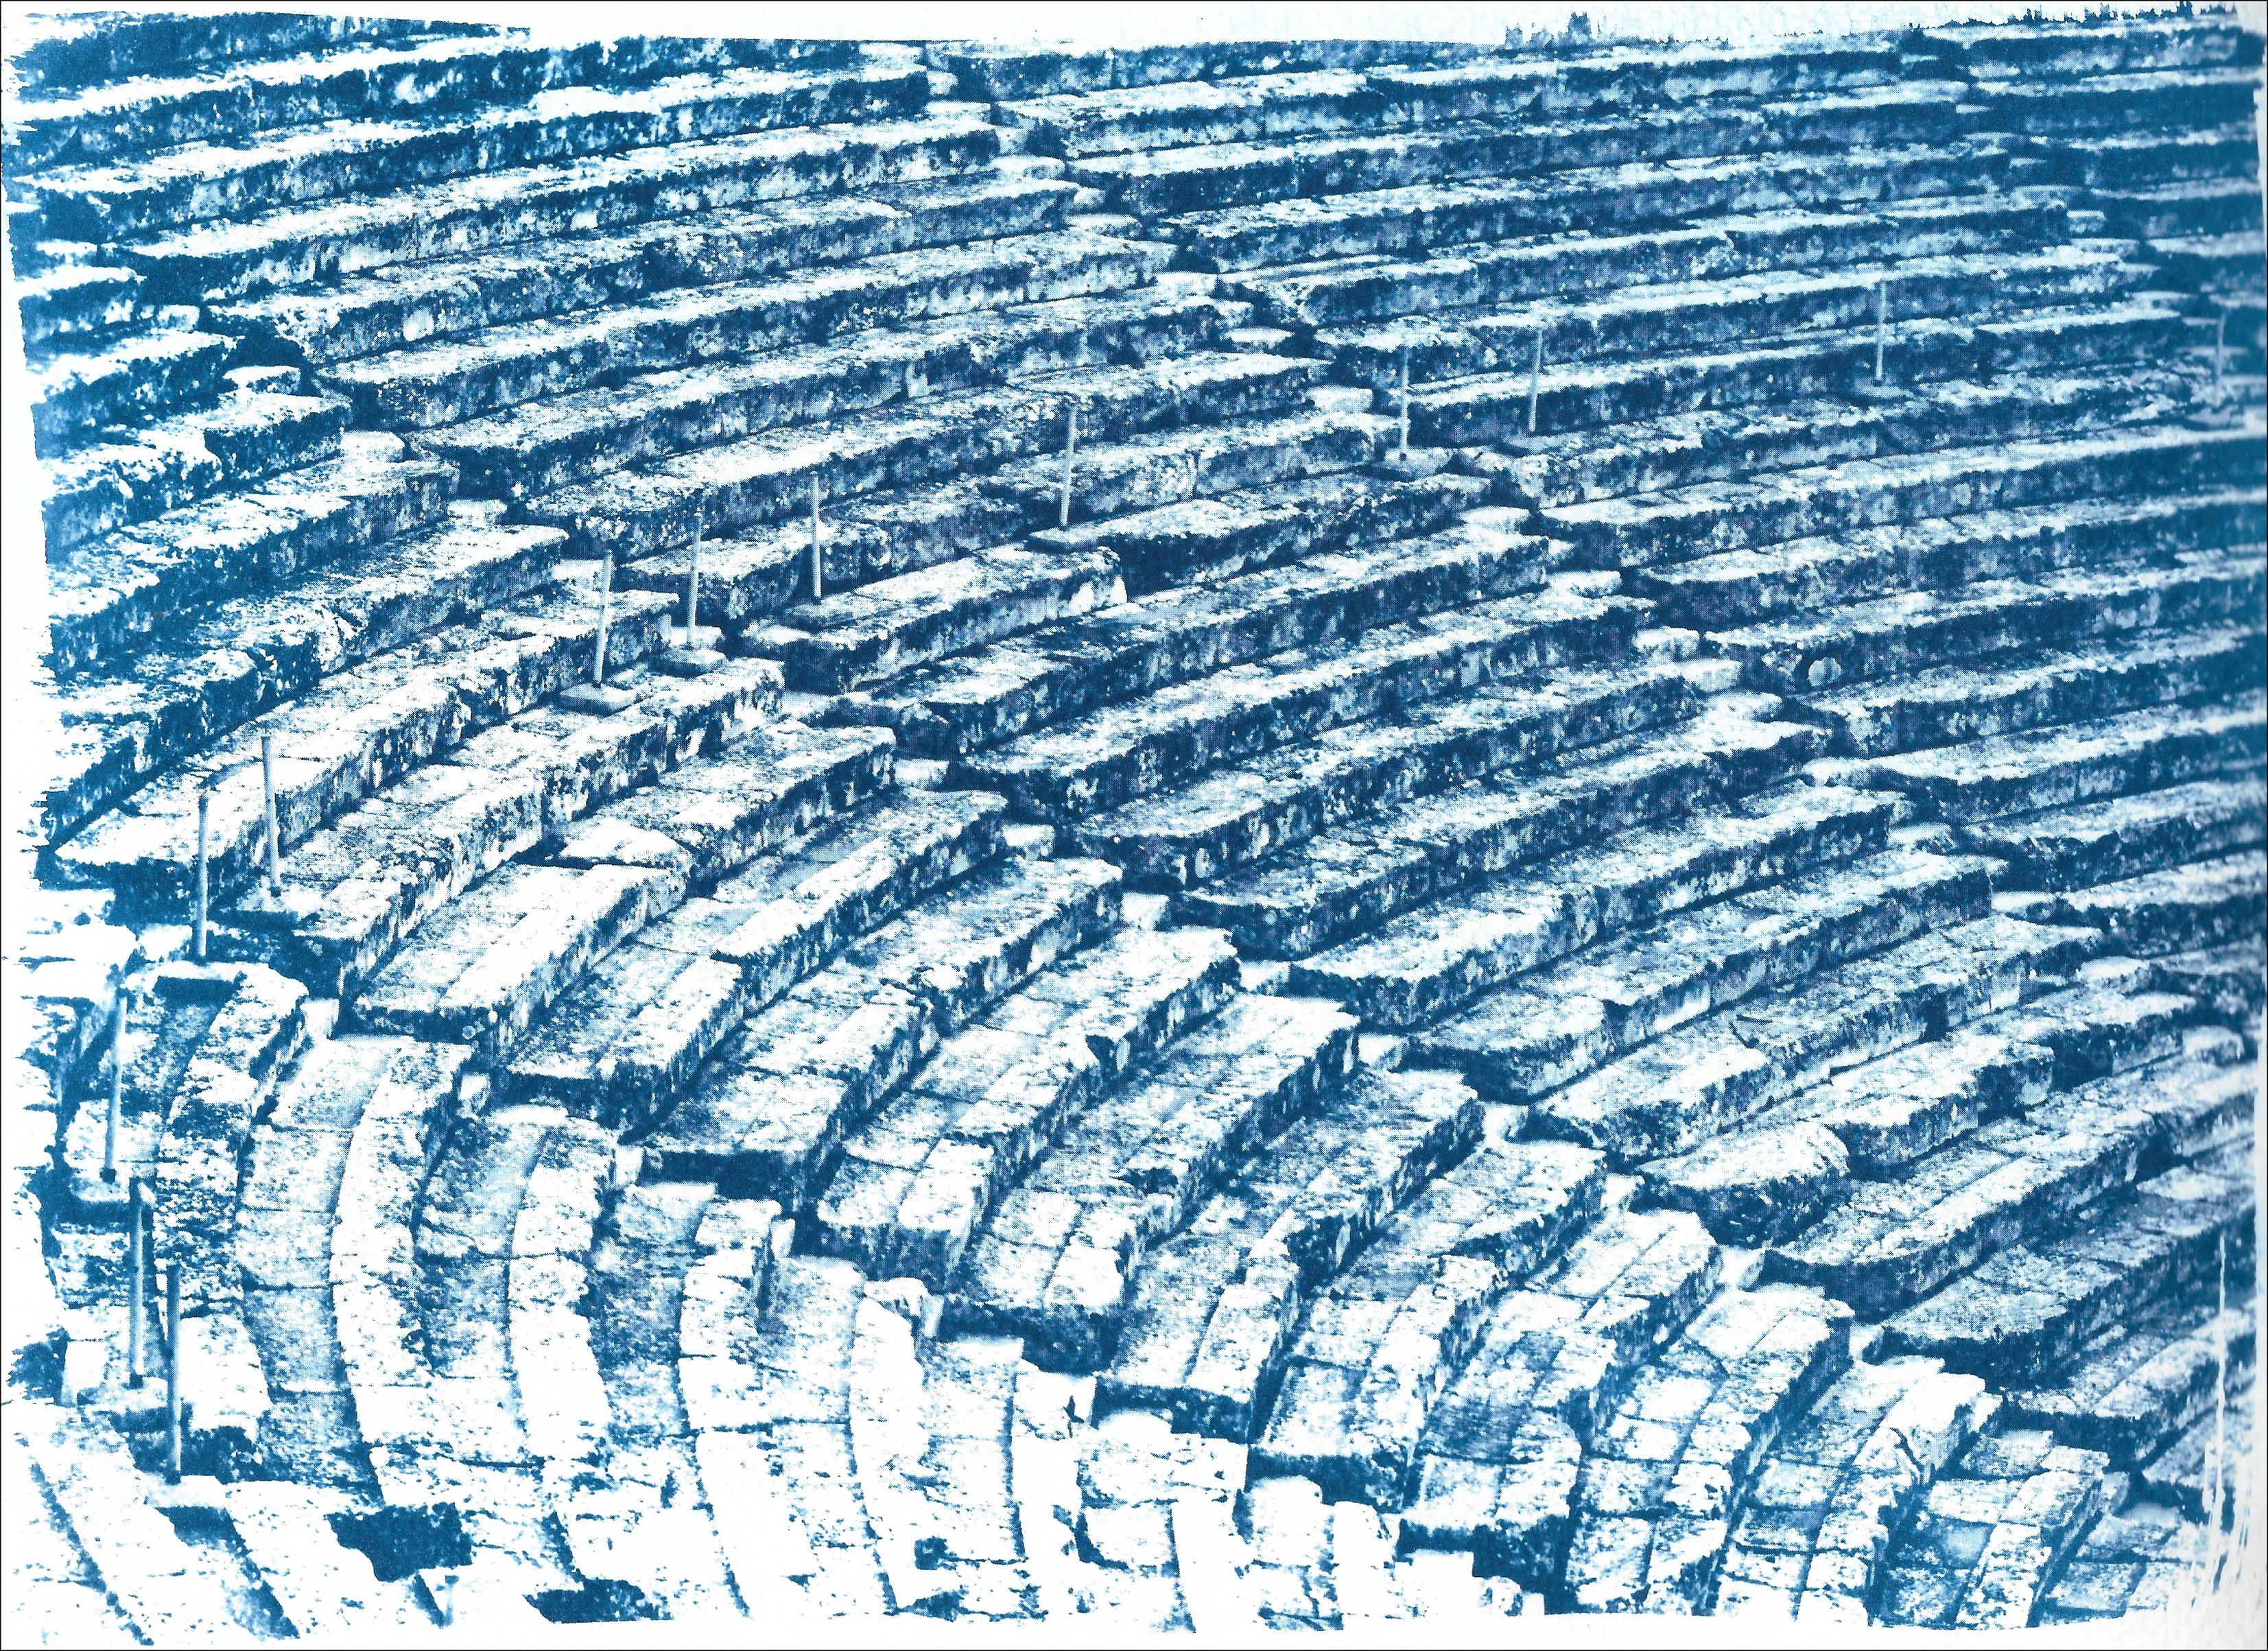 Diptych of Ancient Theaters, 200cmx70cm Cyanotypes, Greek and Roman Architecture - Blue Landscape Print by Kind of Cyan